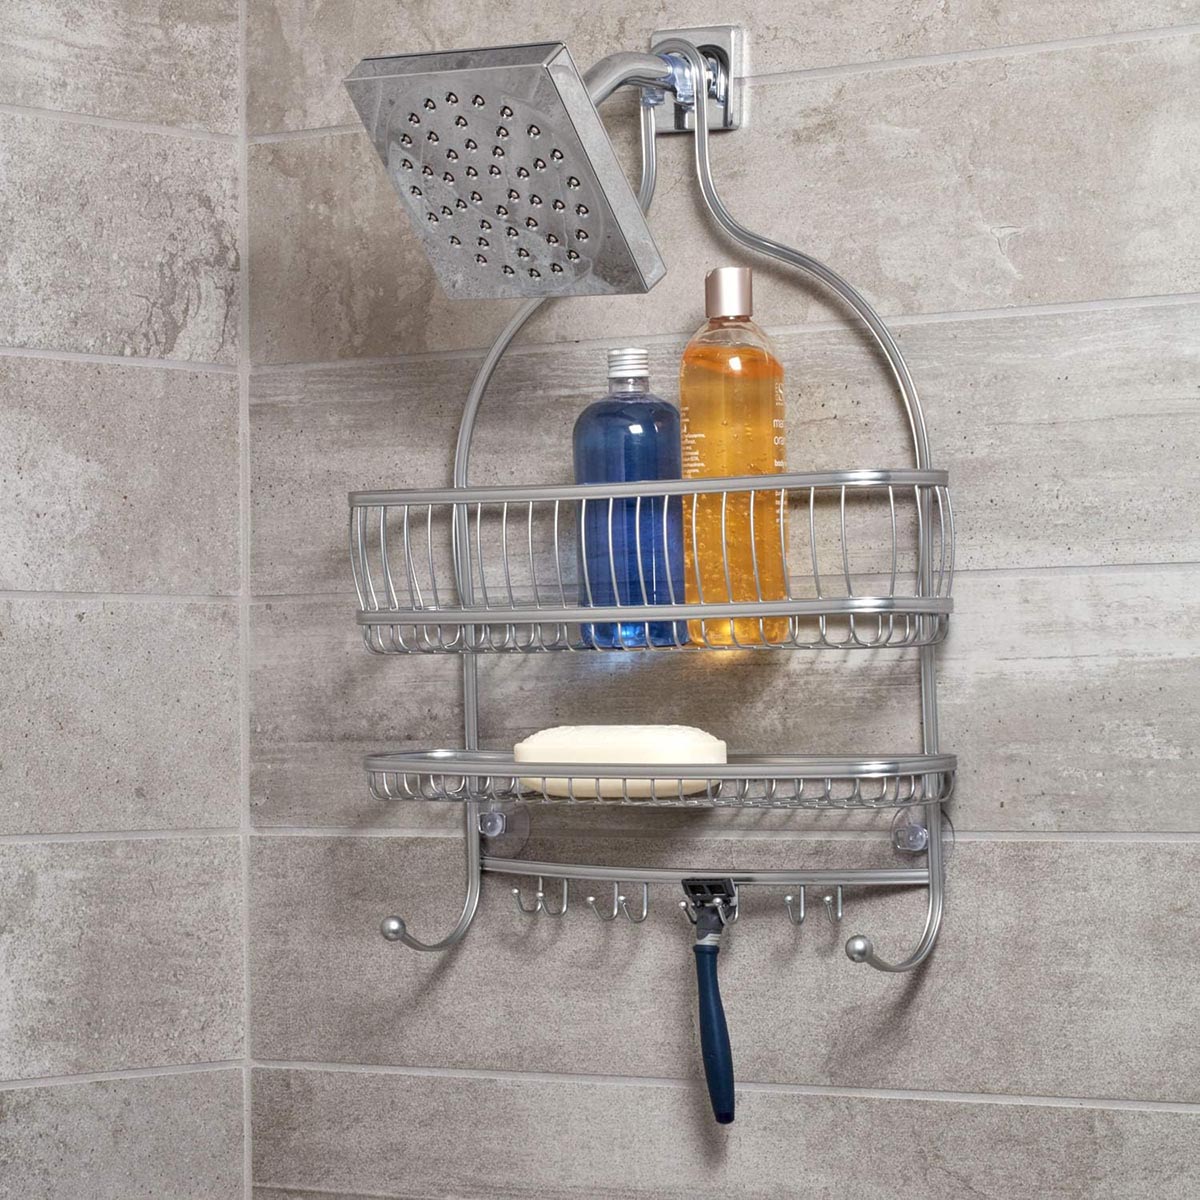 Genius Inventions for Your Cleanest Bathroom Keep It Organized